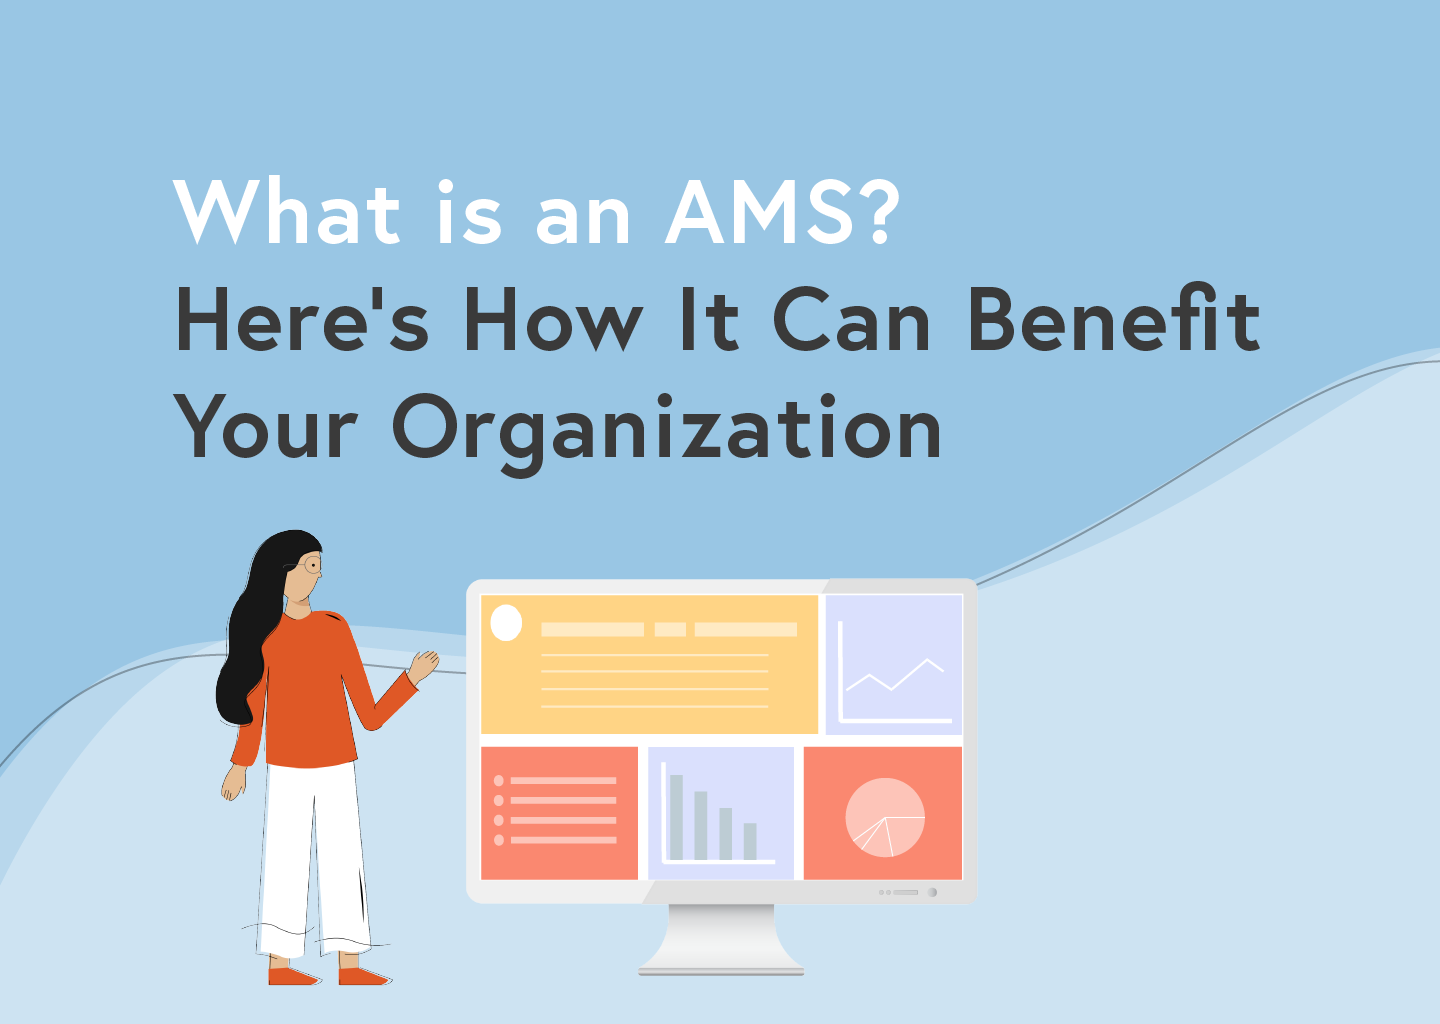 What Is an AMS and Why Do You Need One?